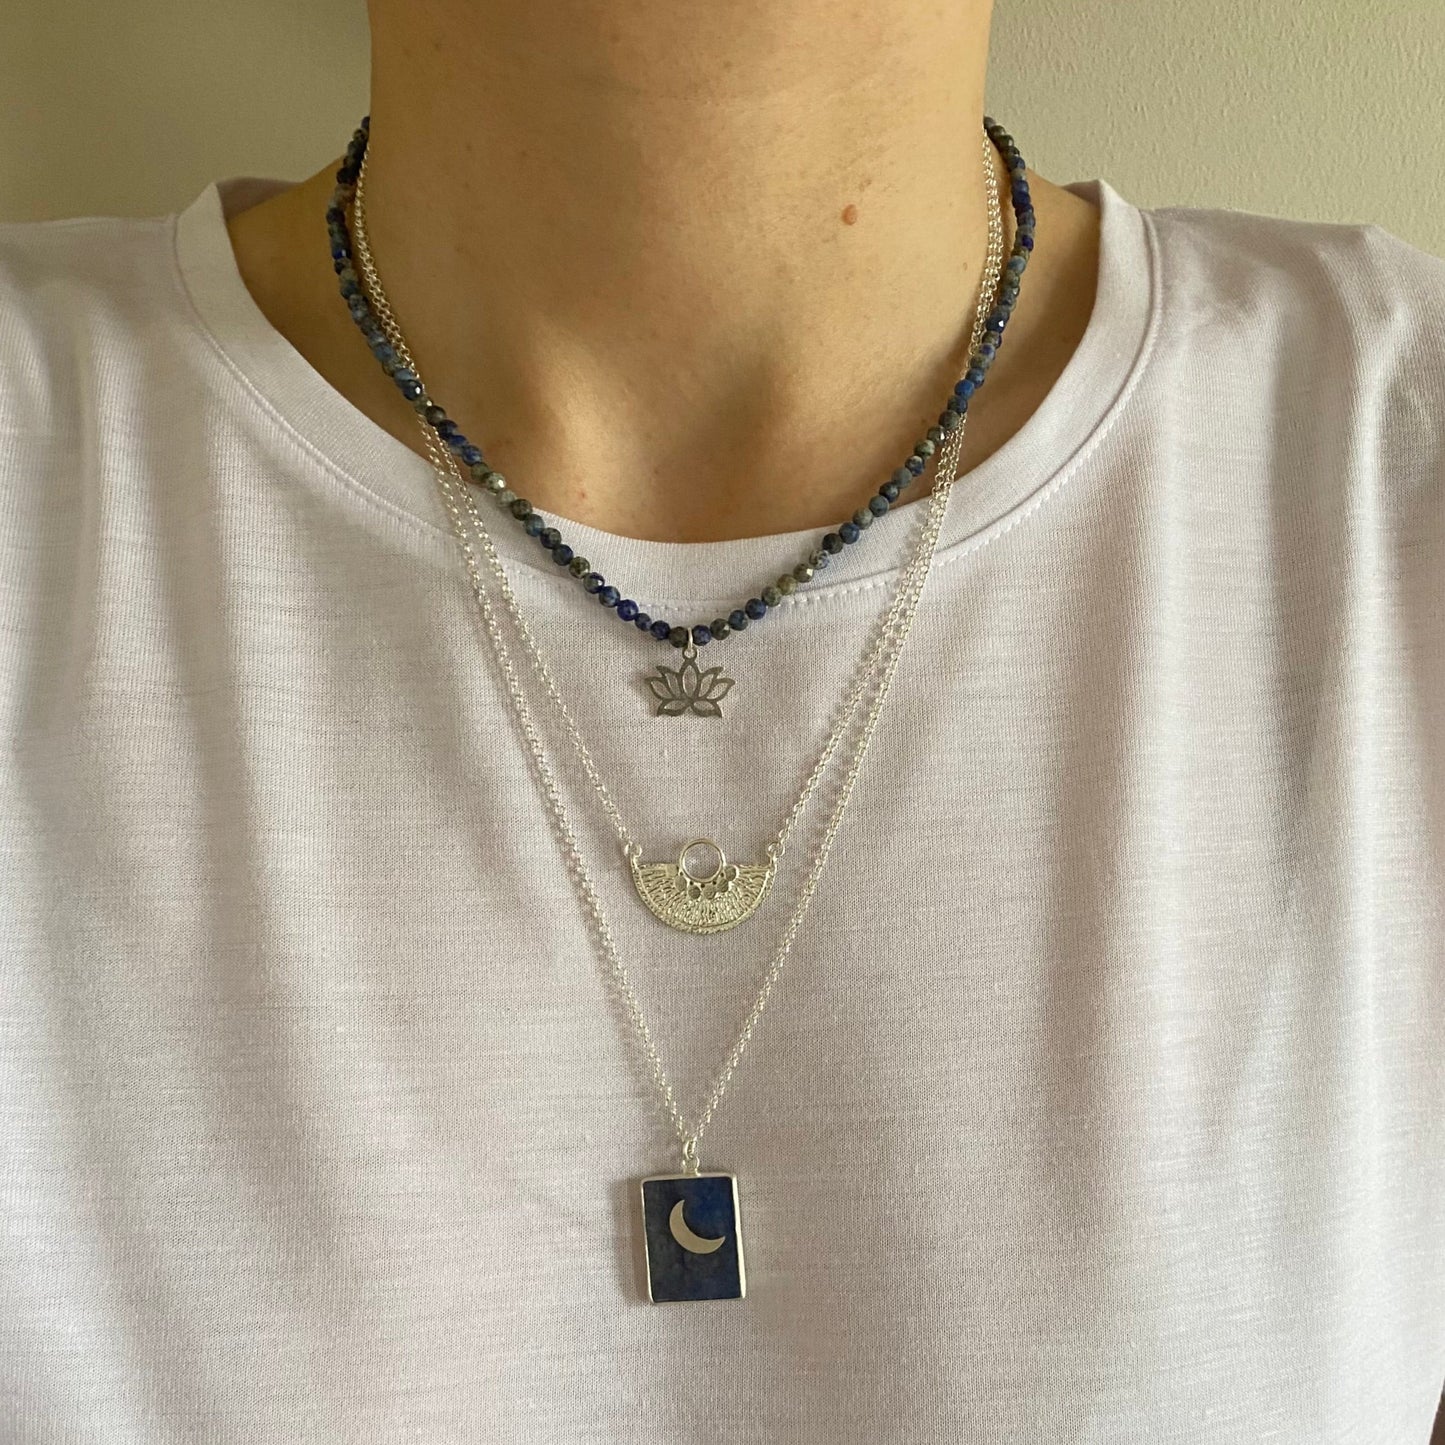 Necklace with Lapis Lazuli Pendant, Moon and North Star Pendant Options